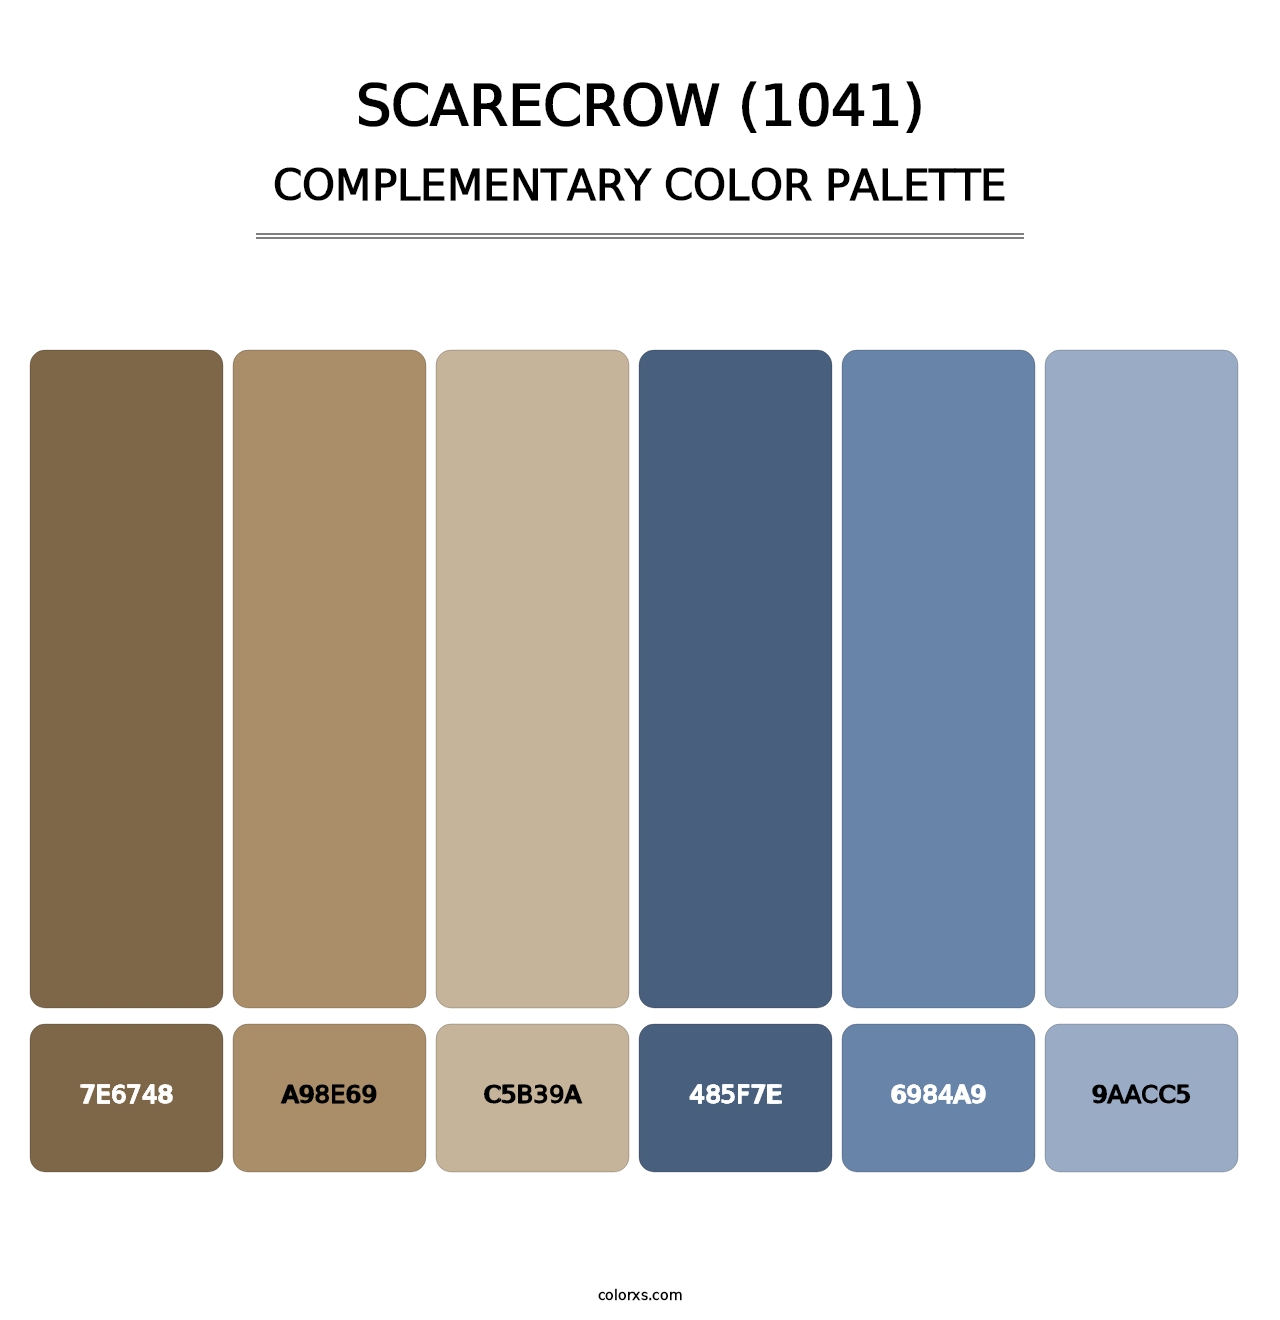 Scarecrow (1041) - Complementary Color Palette